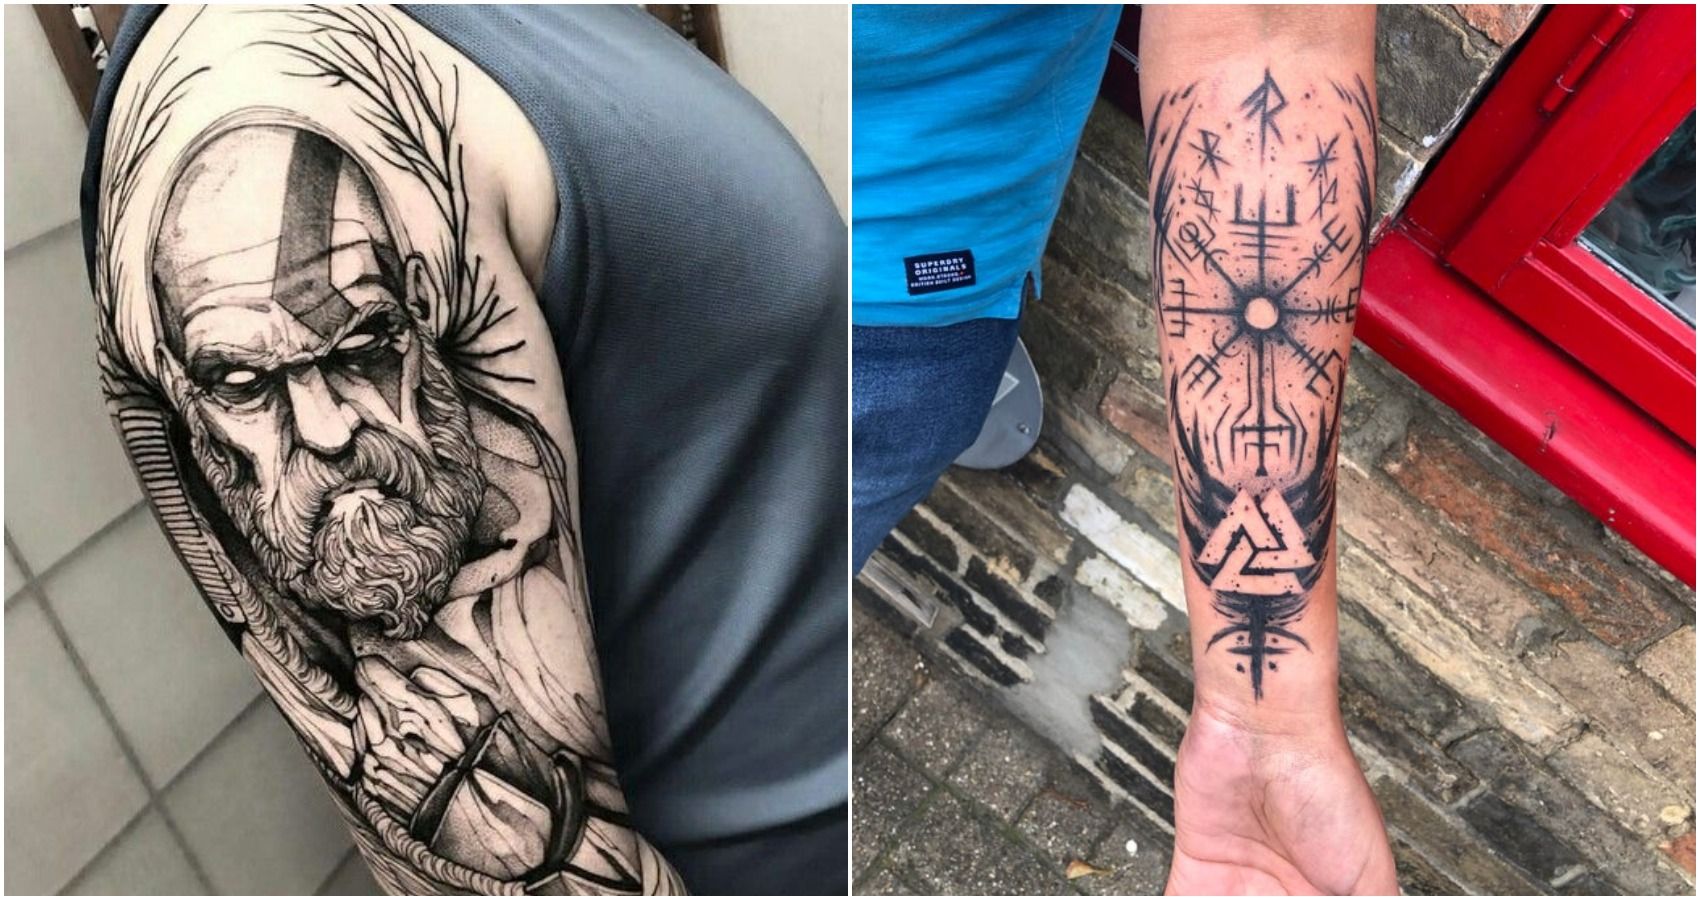 Blades of Chaos Tattoo Ideas - wide 2